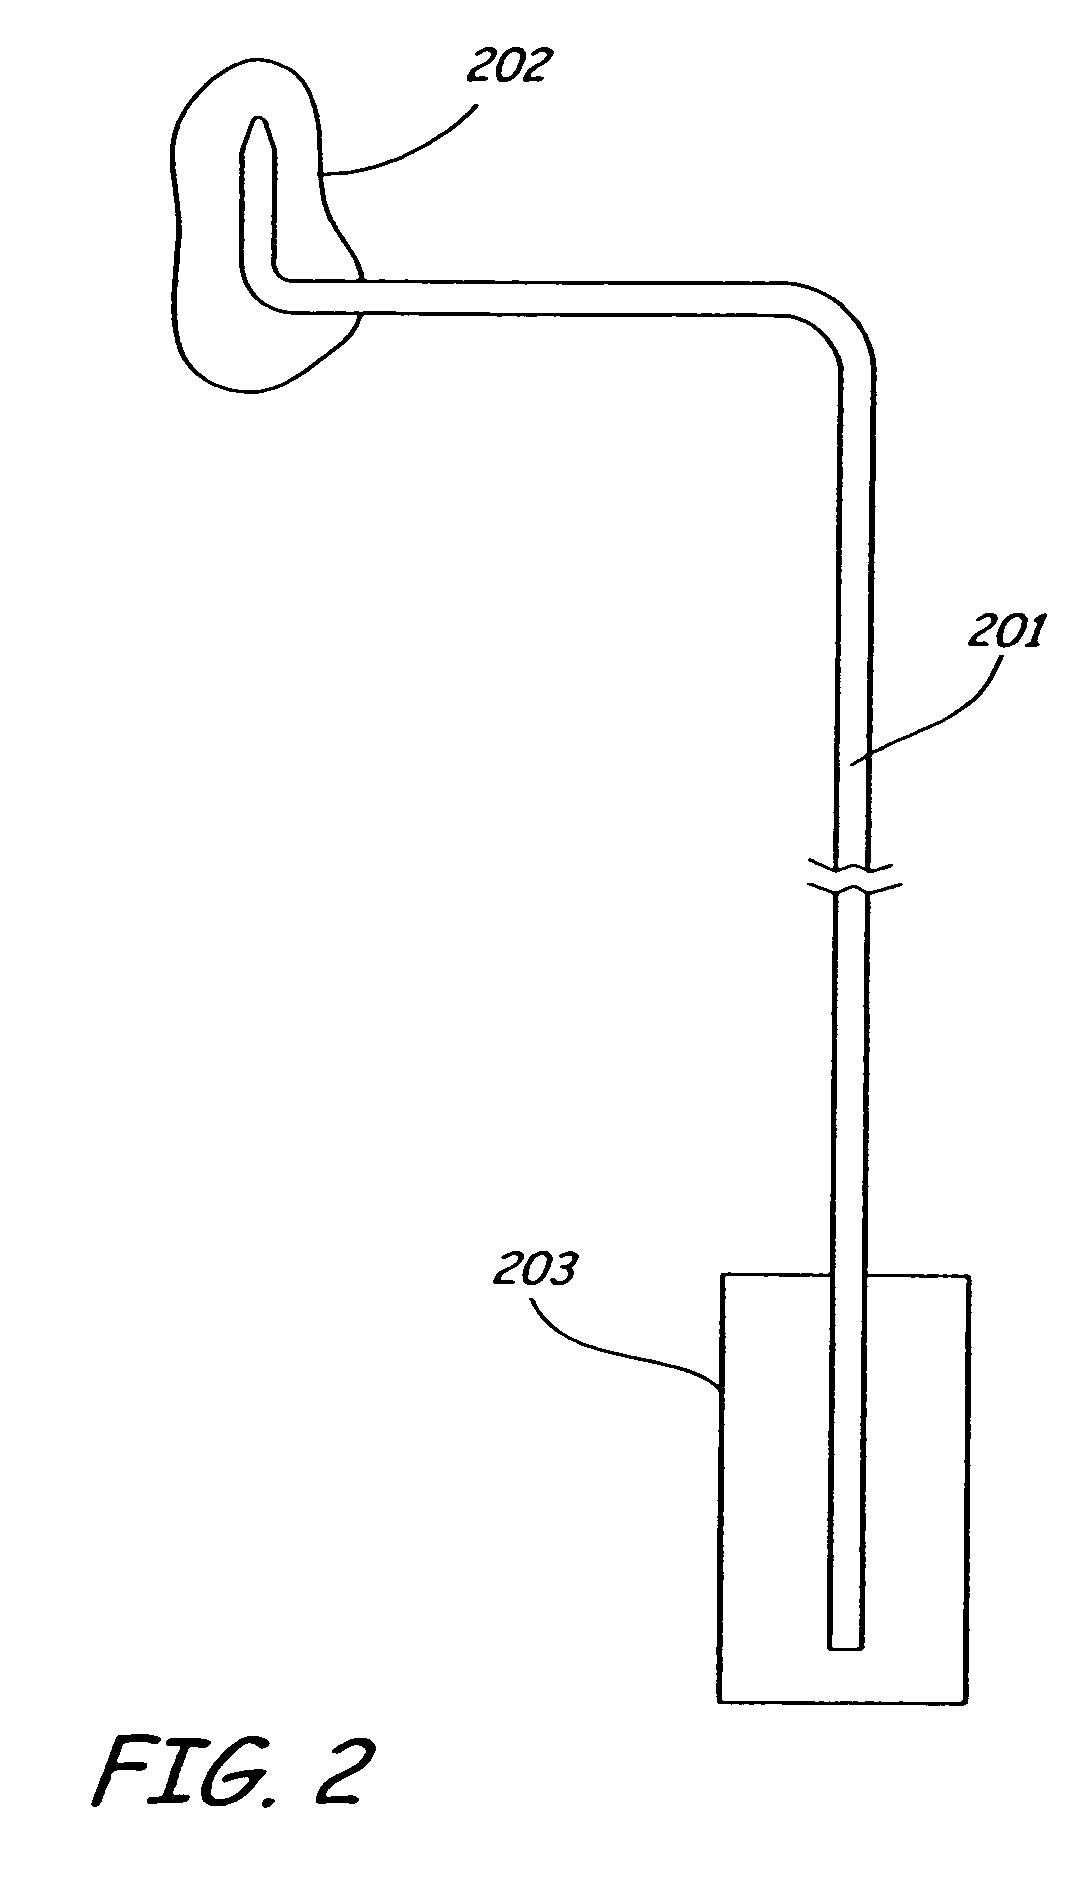 Electrical, high temperature test probe with conductive driven guard